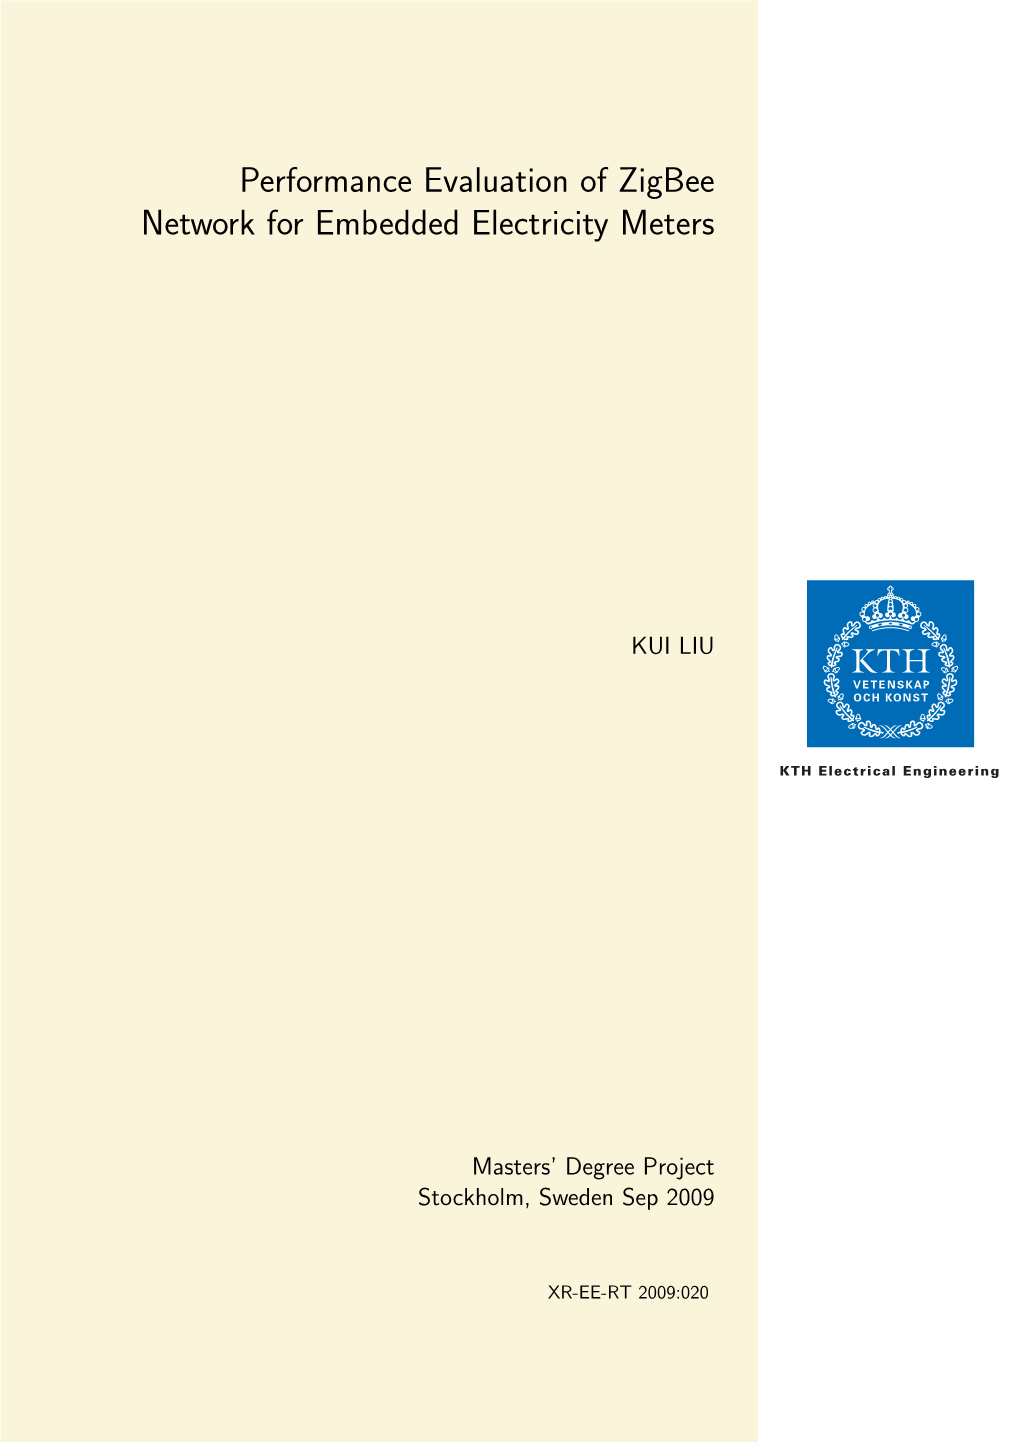 Performance Evaluation of Zigbee Network for Embedded Electricity Meters